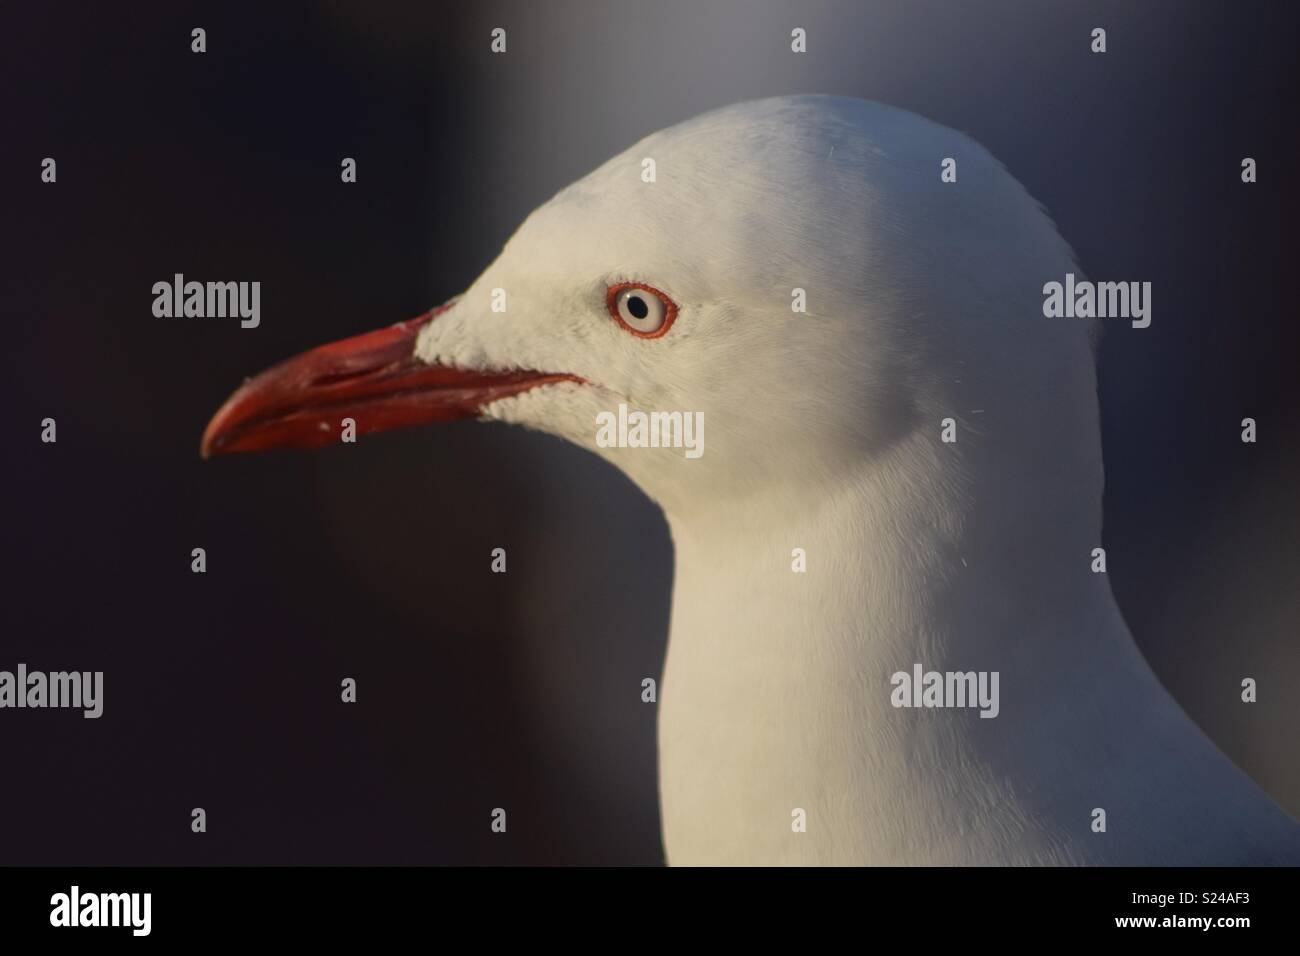 An closeup photo of a Gull with piercing eyes and red beak against a background of muted grays and blacks. Stock Photo